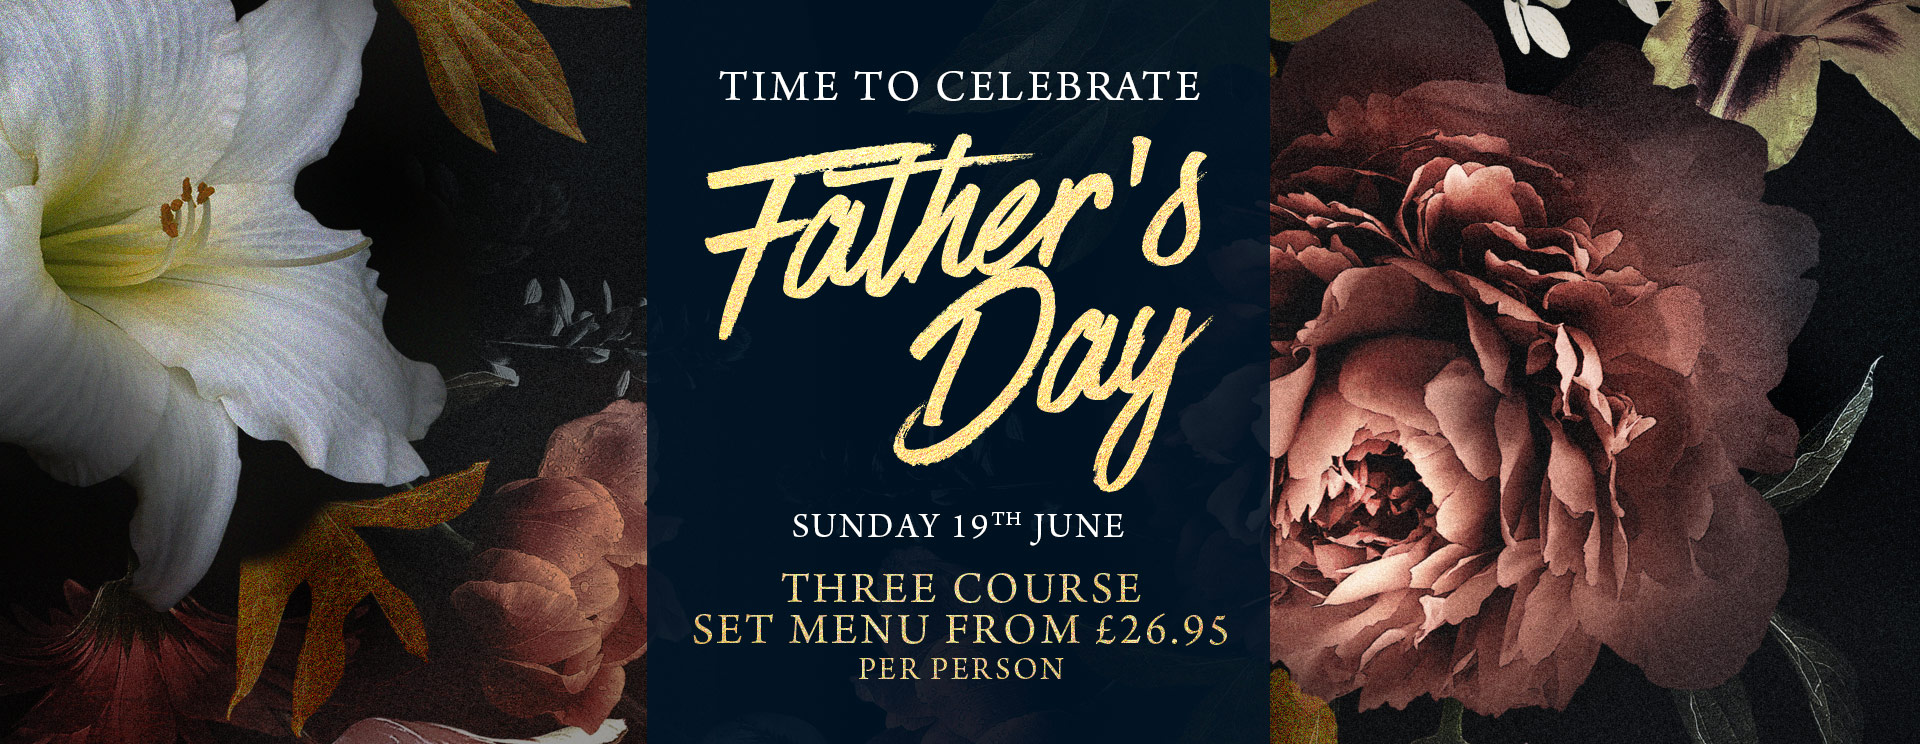 Fathers Day at The Oat Sheaf